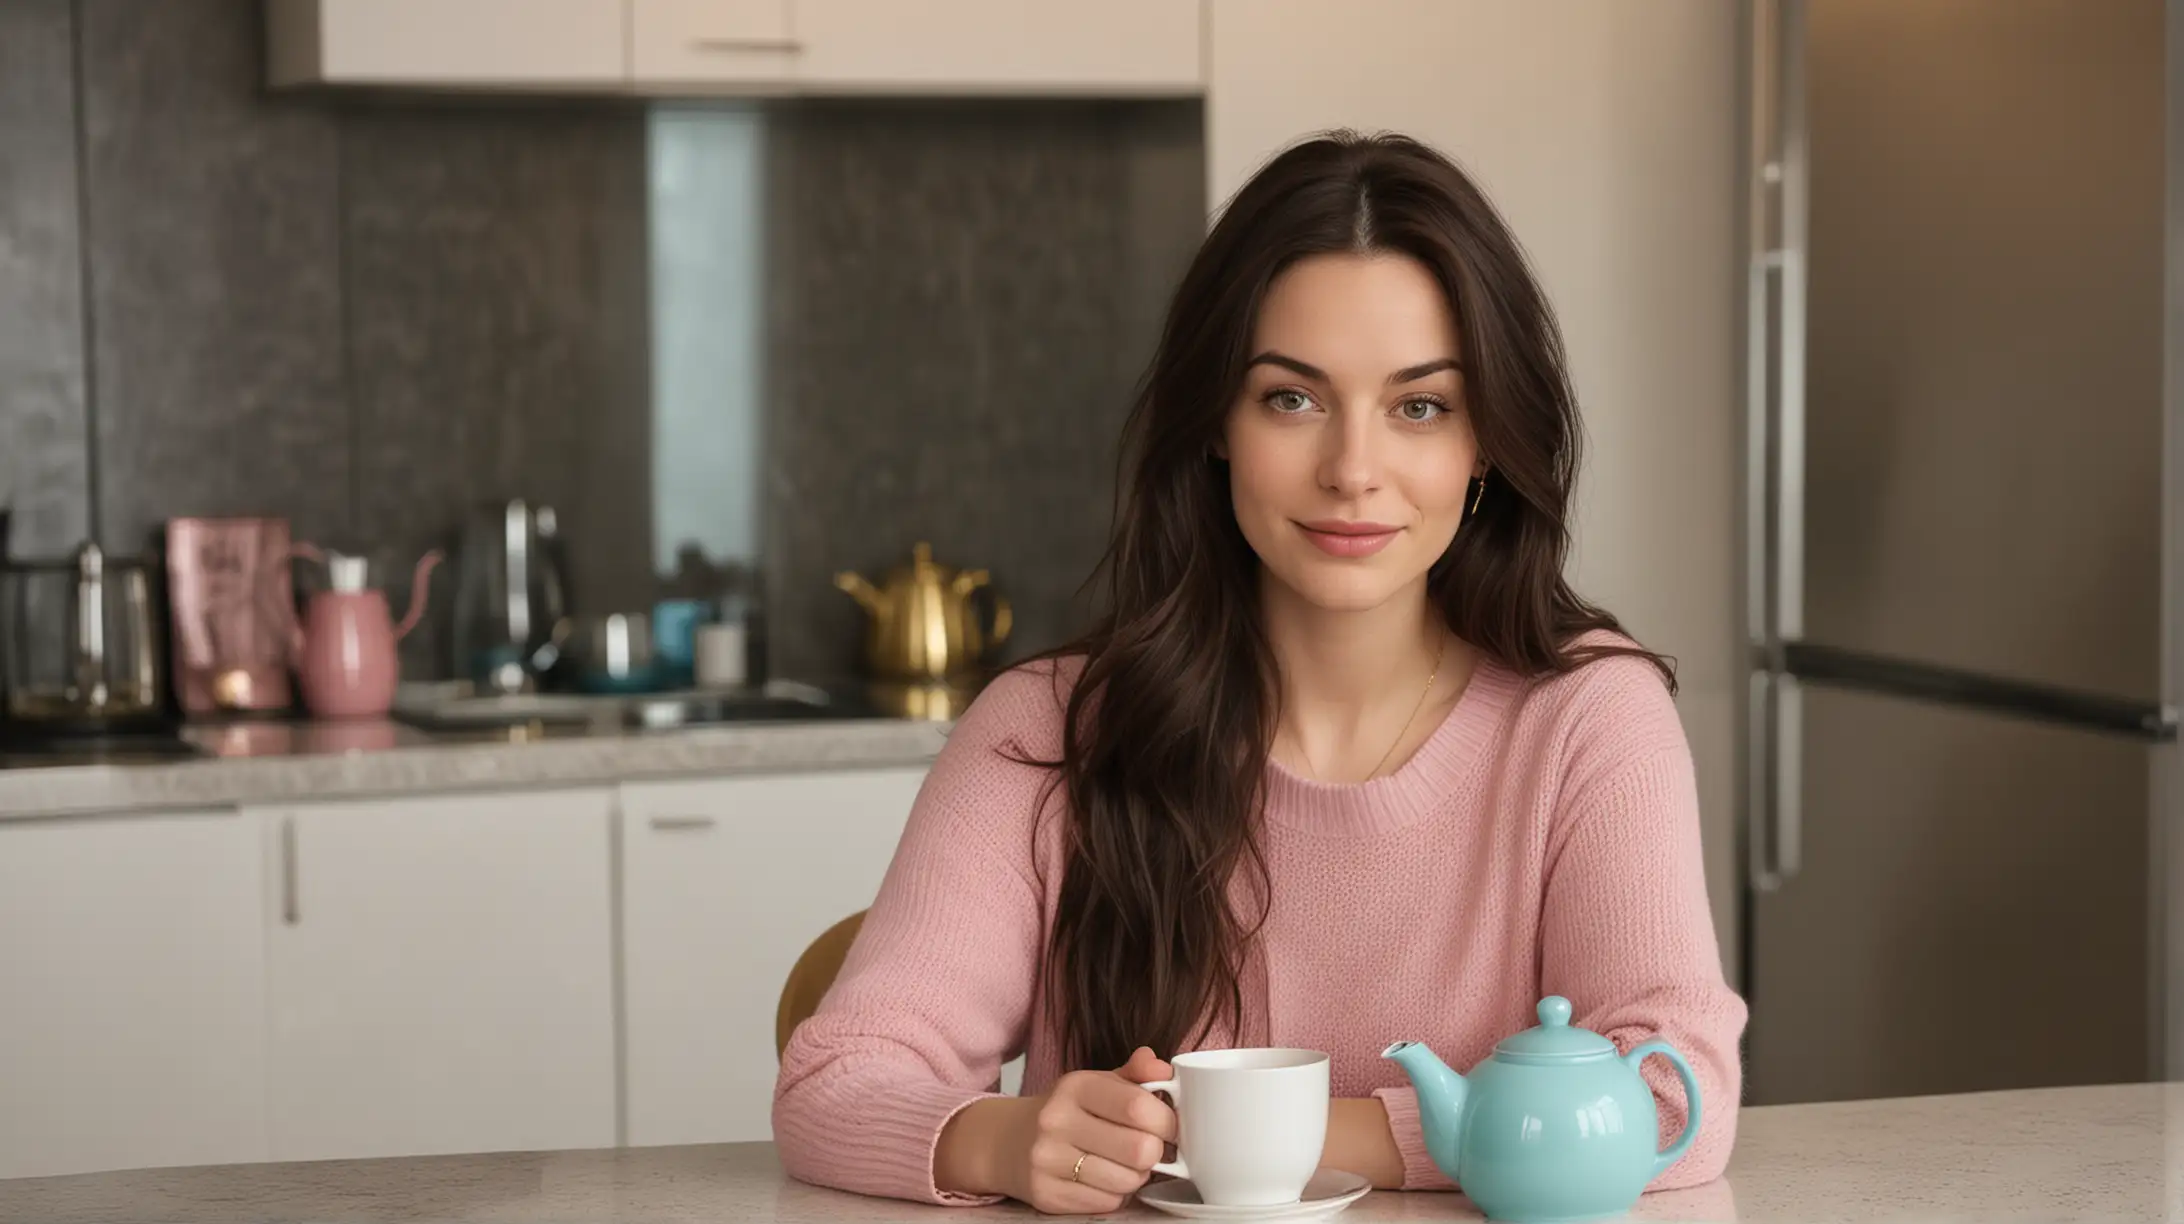 30 year old pale white woman with long dark brown hair parted to the right, wearing a gold necklace, pink sweater and blue jeans. She is sitting at a kitchen table with one single teapot and exacltly two cups of tea. Urban high rise apartment background at nighttime